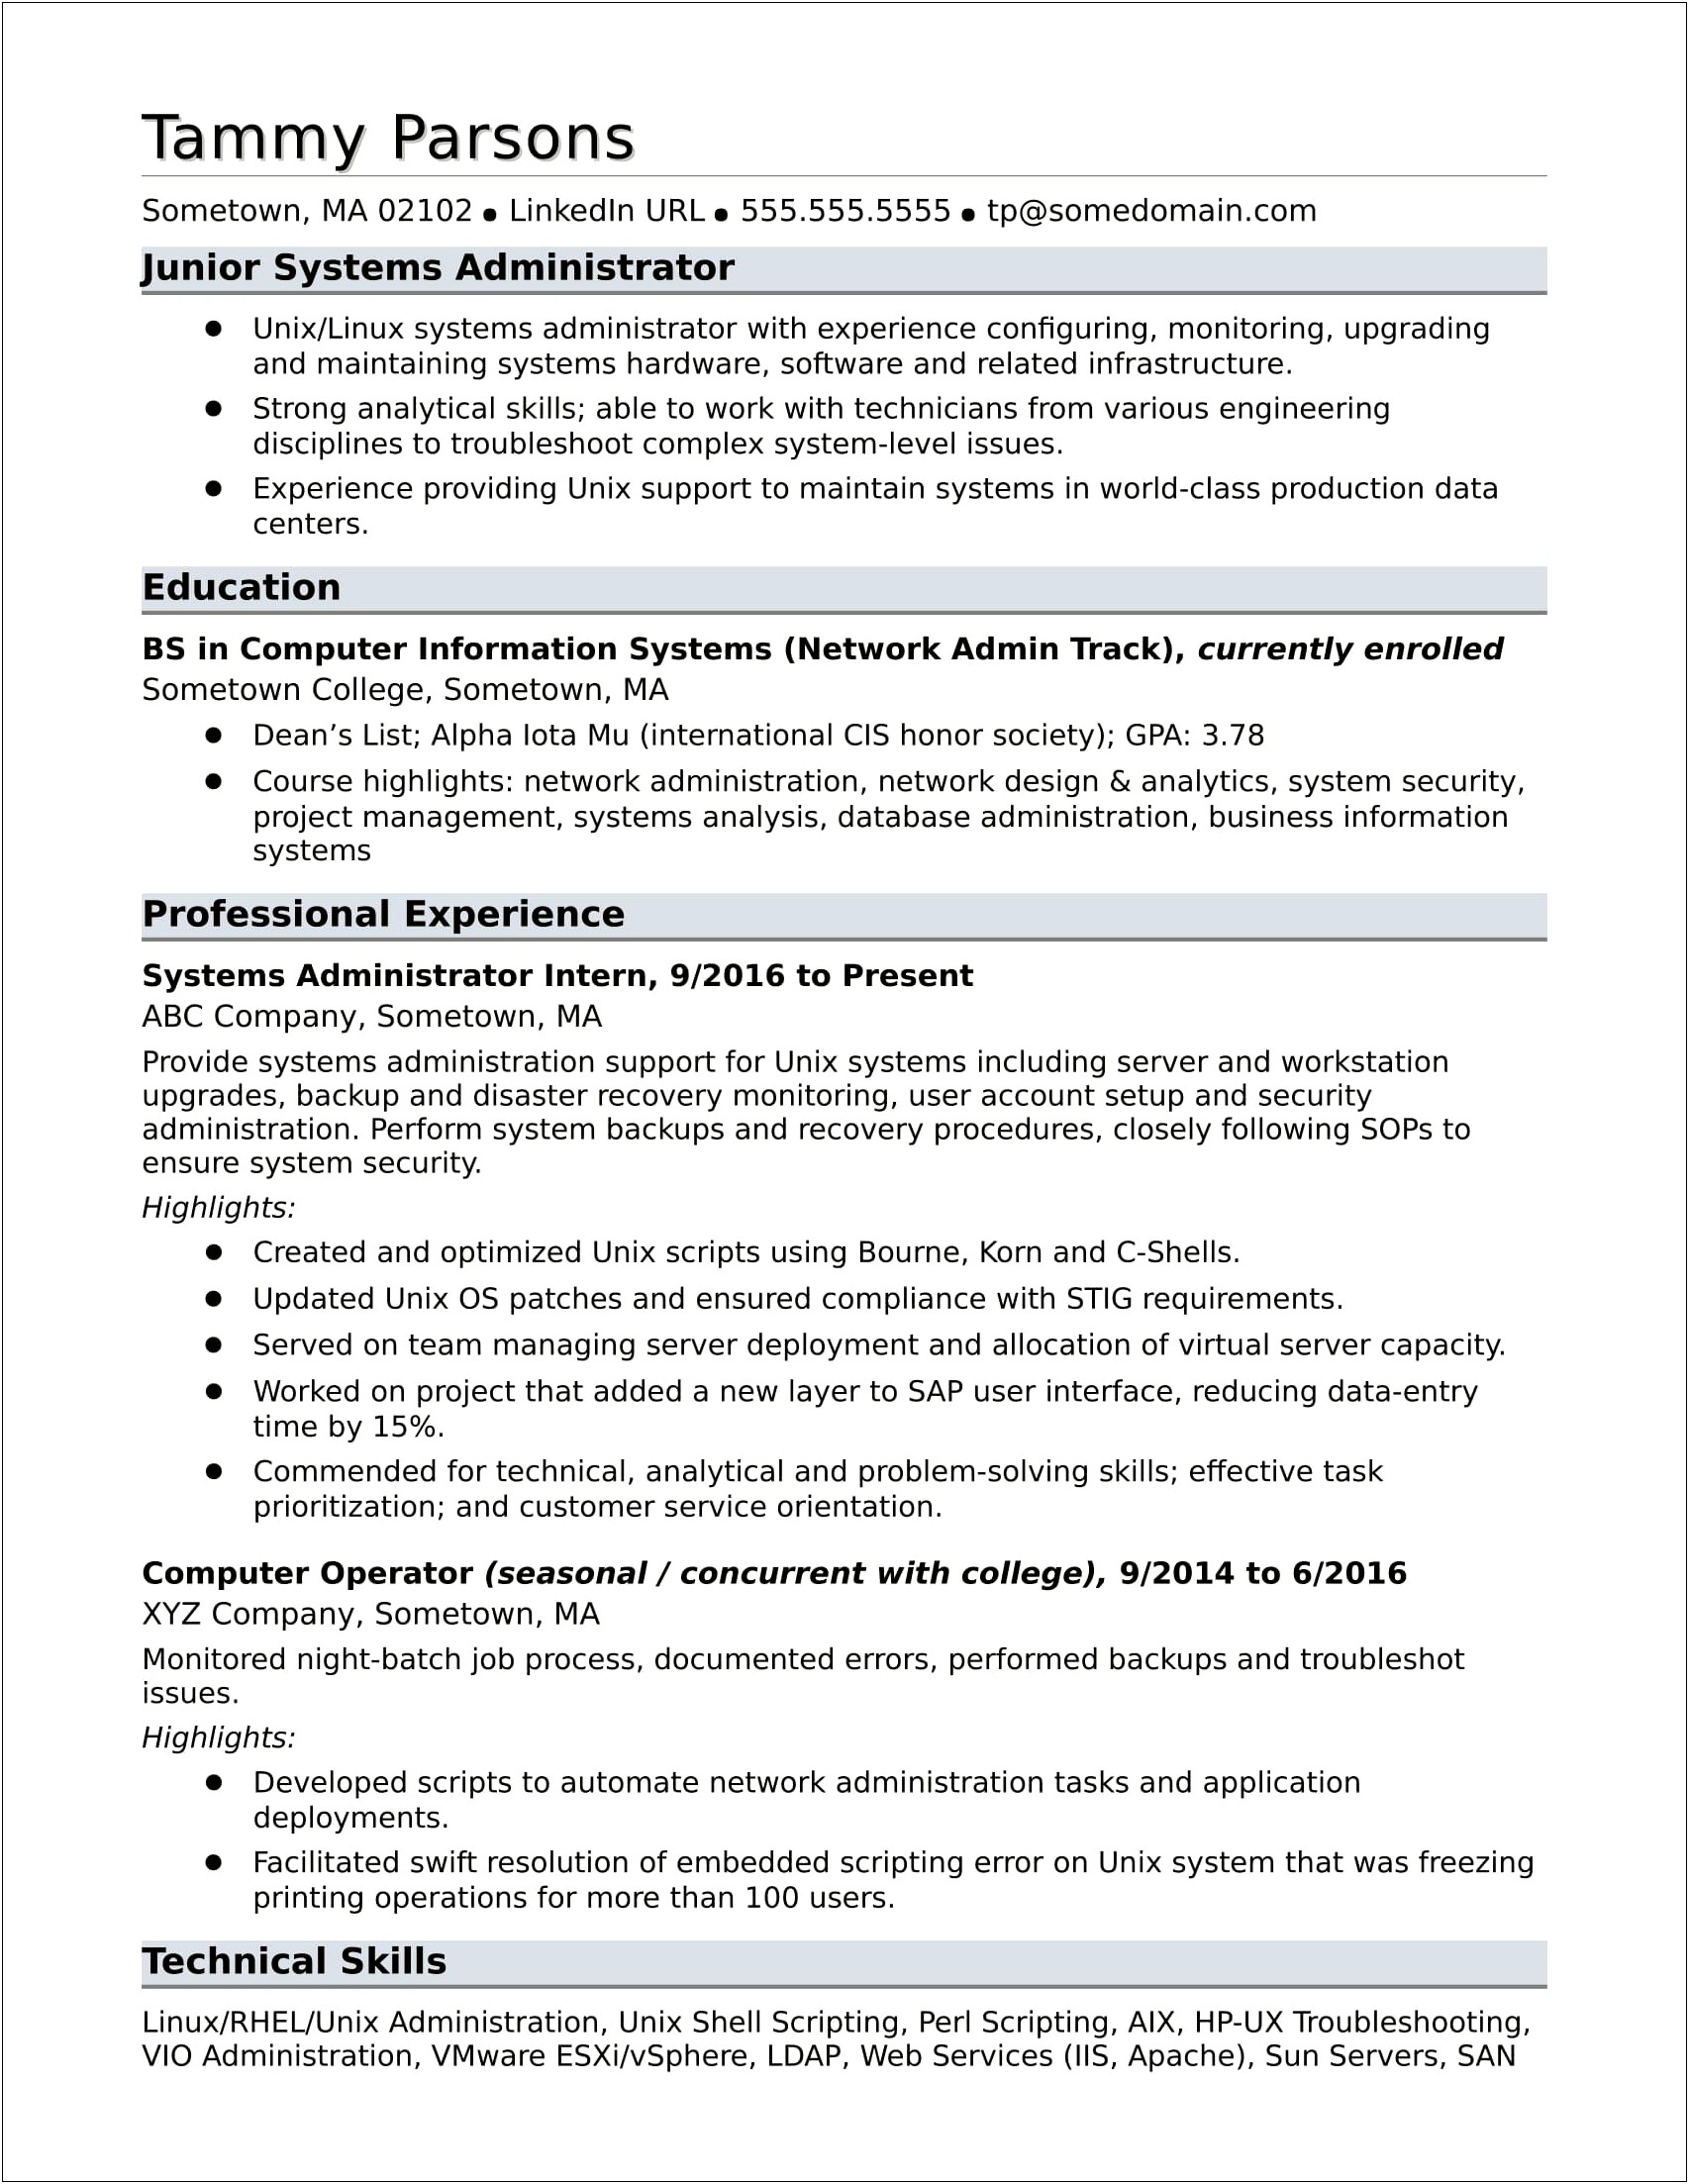 Where To List Technological Skills On Resume